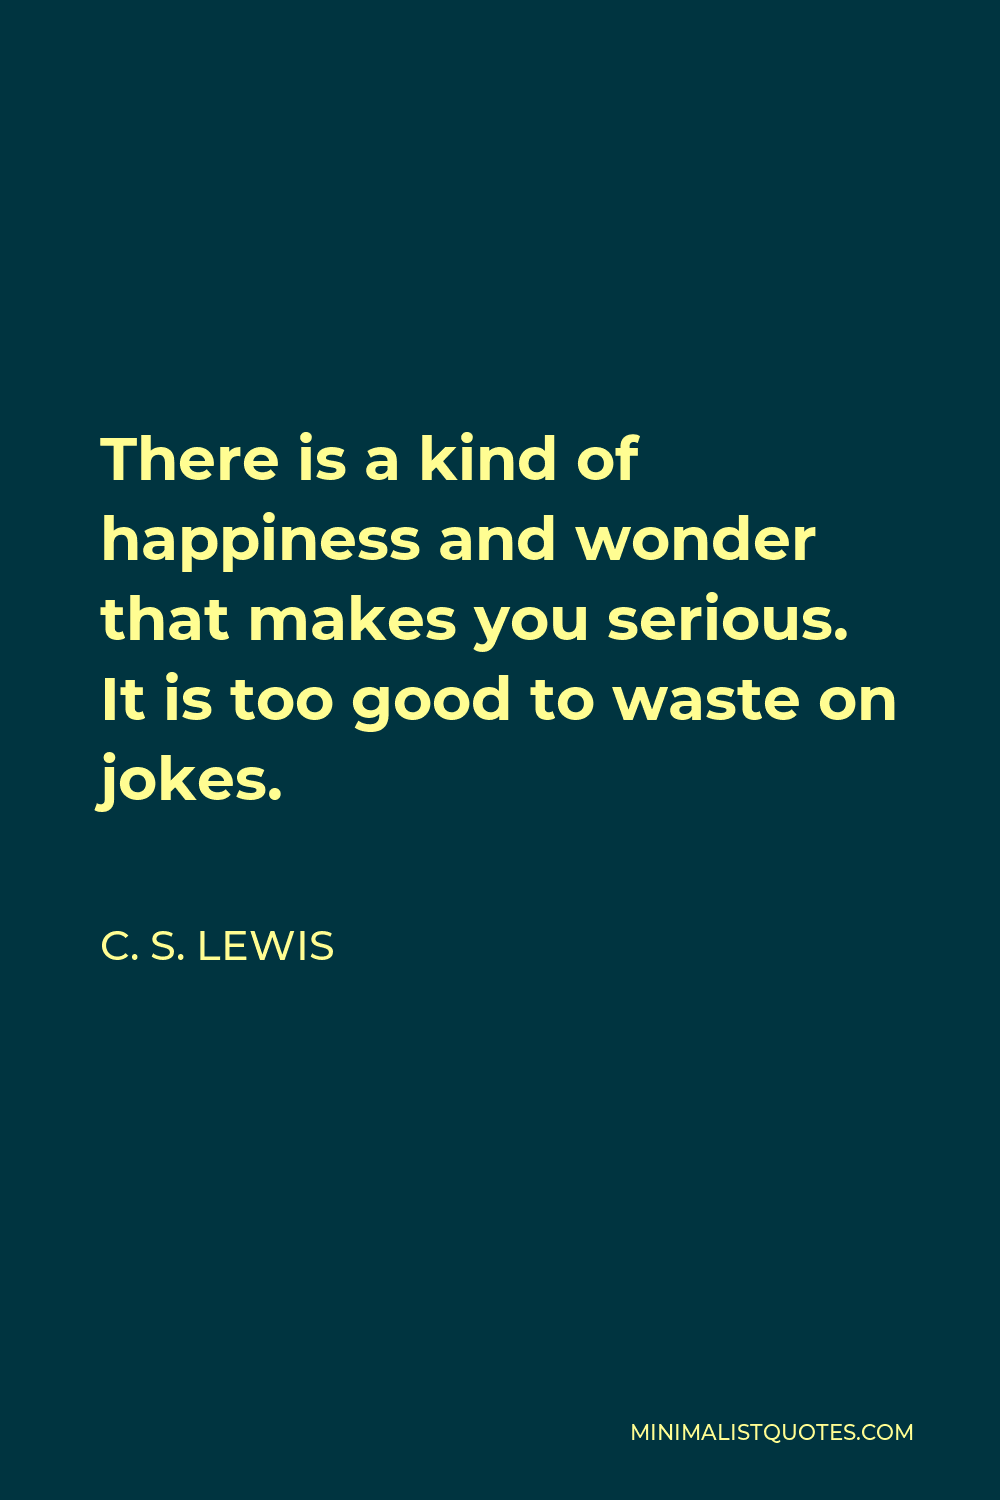 C. S. Lewis Quote - There is a kind of happiness and wonder that makes you serious. It is too good to waste on jokes.